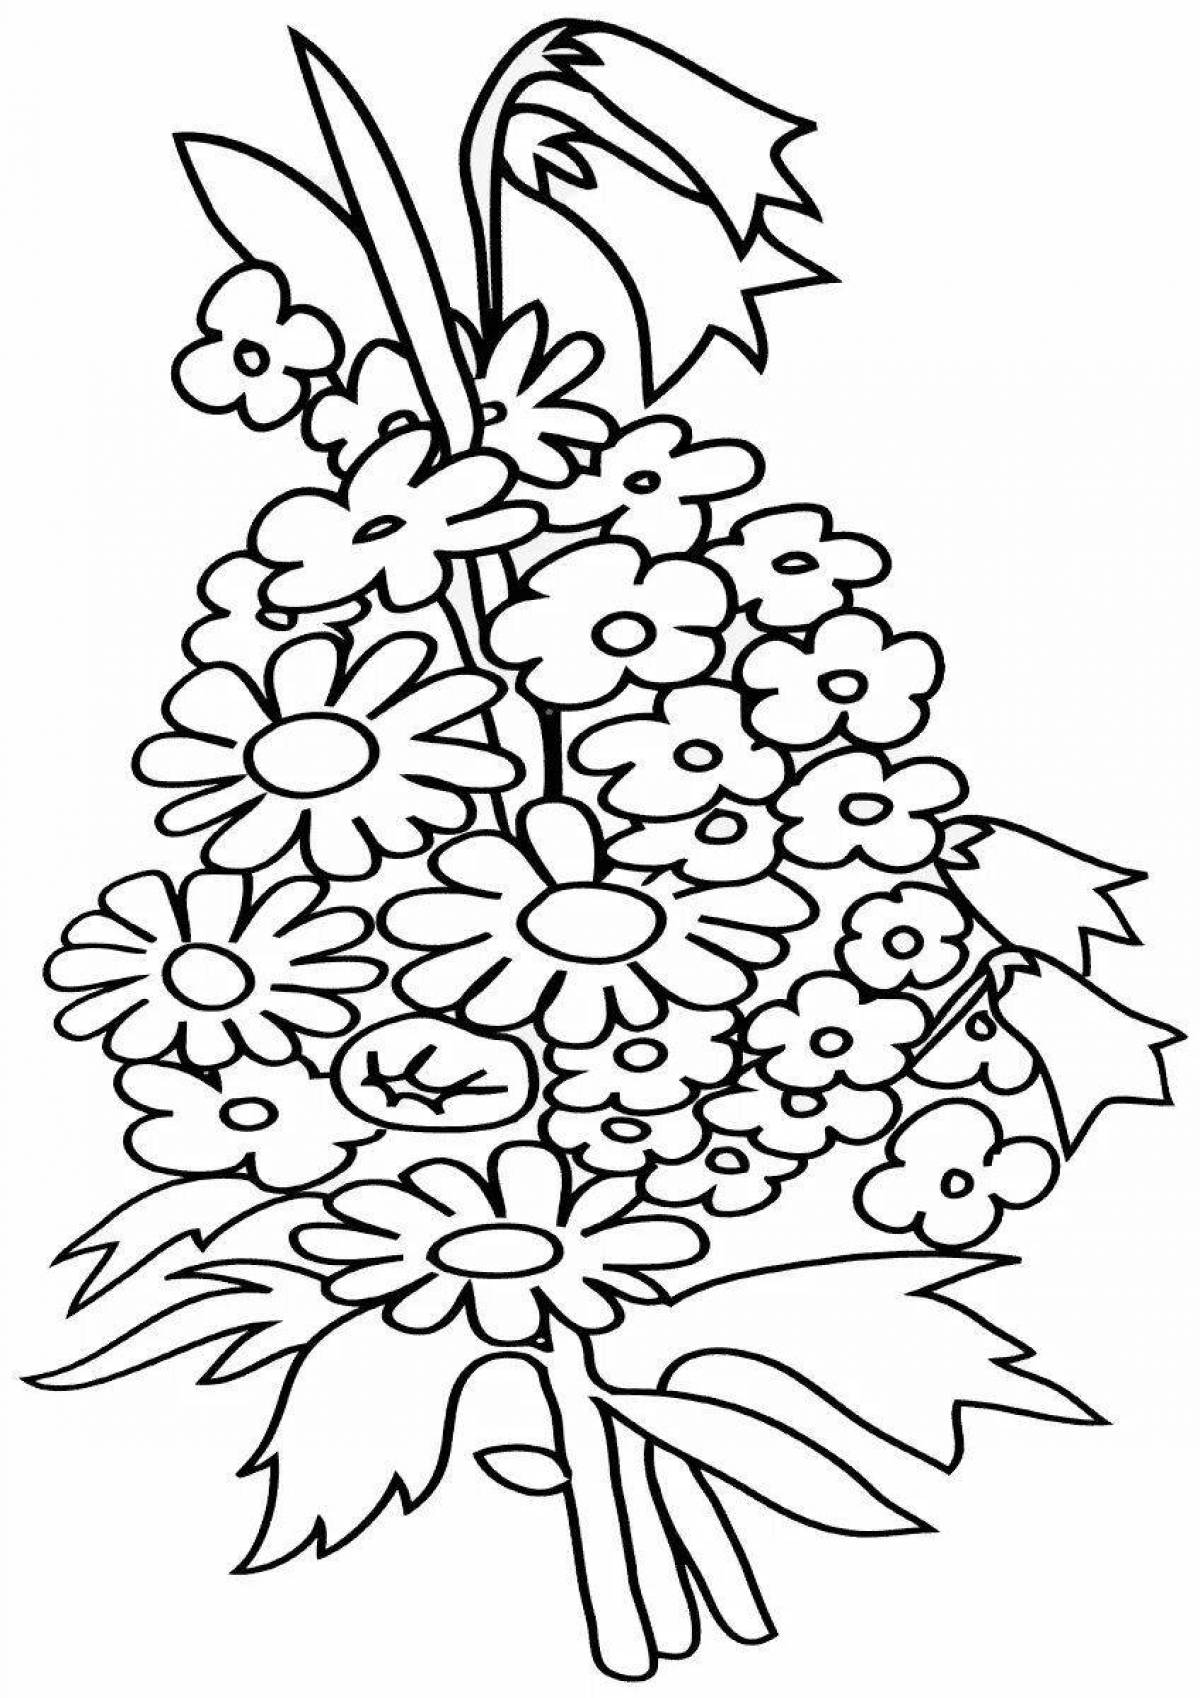 Coloring book playful forget-me-not flower